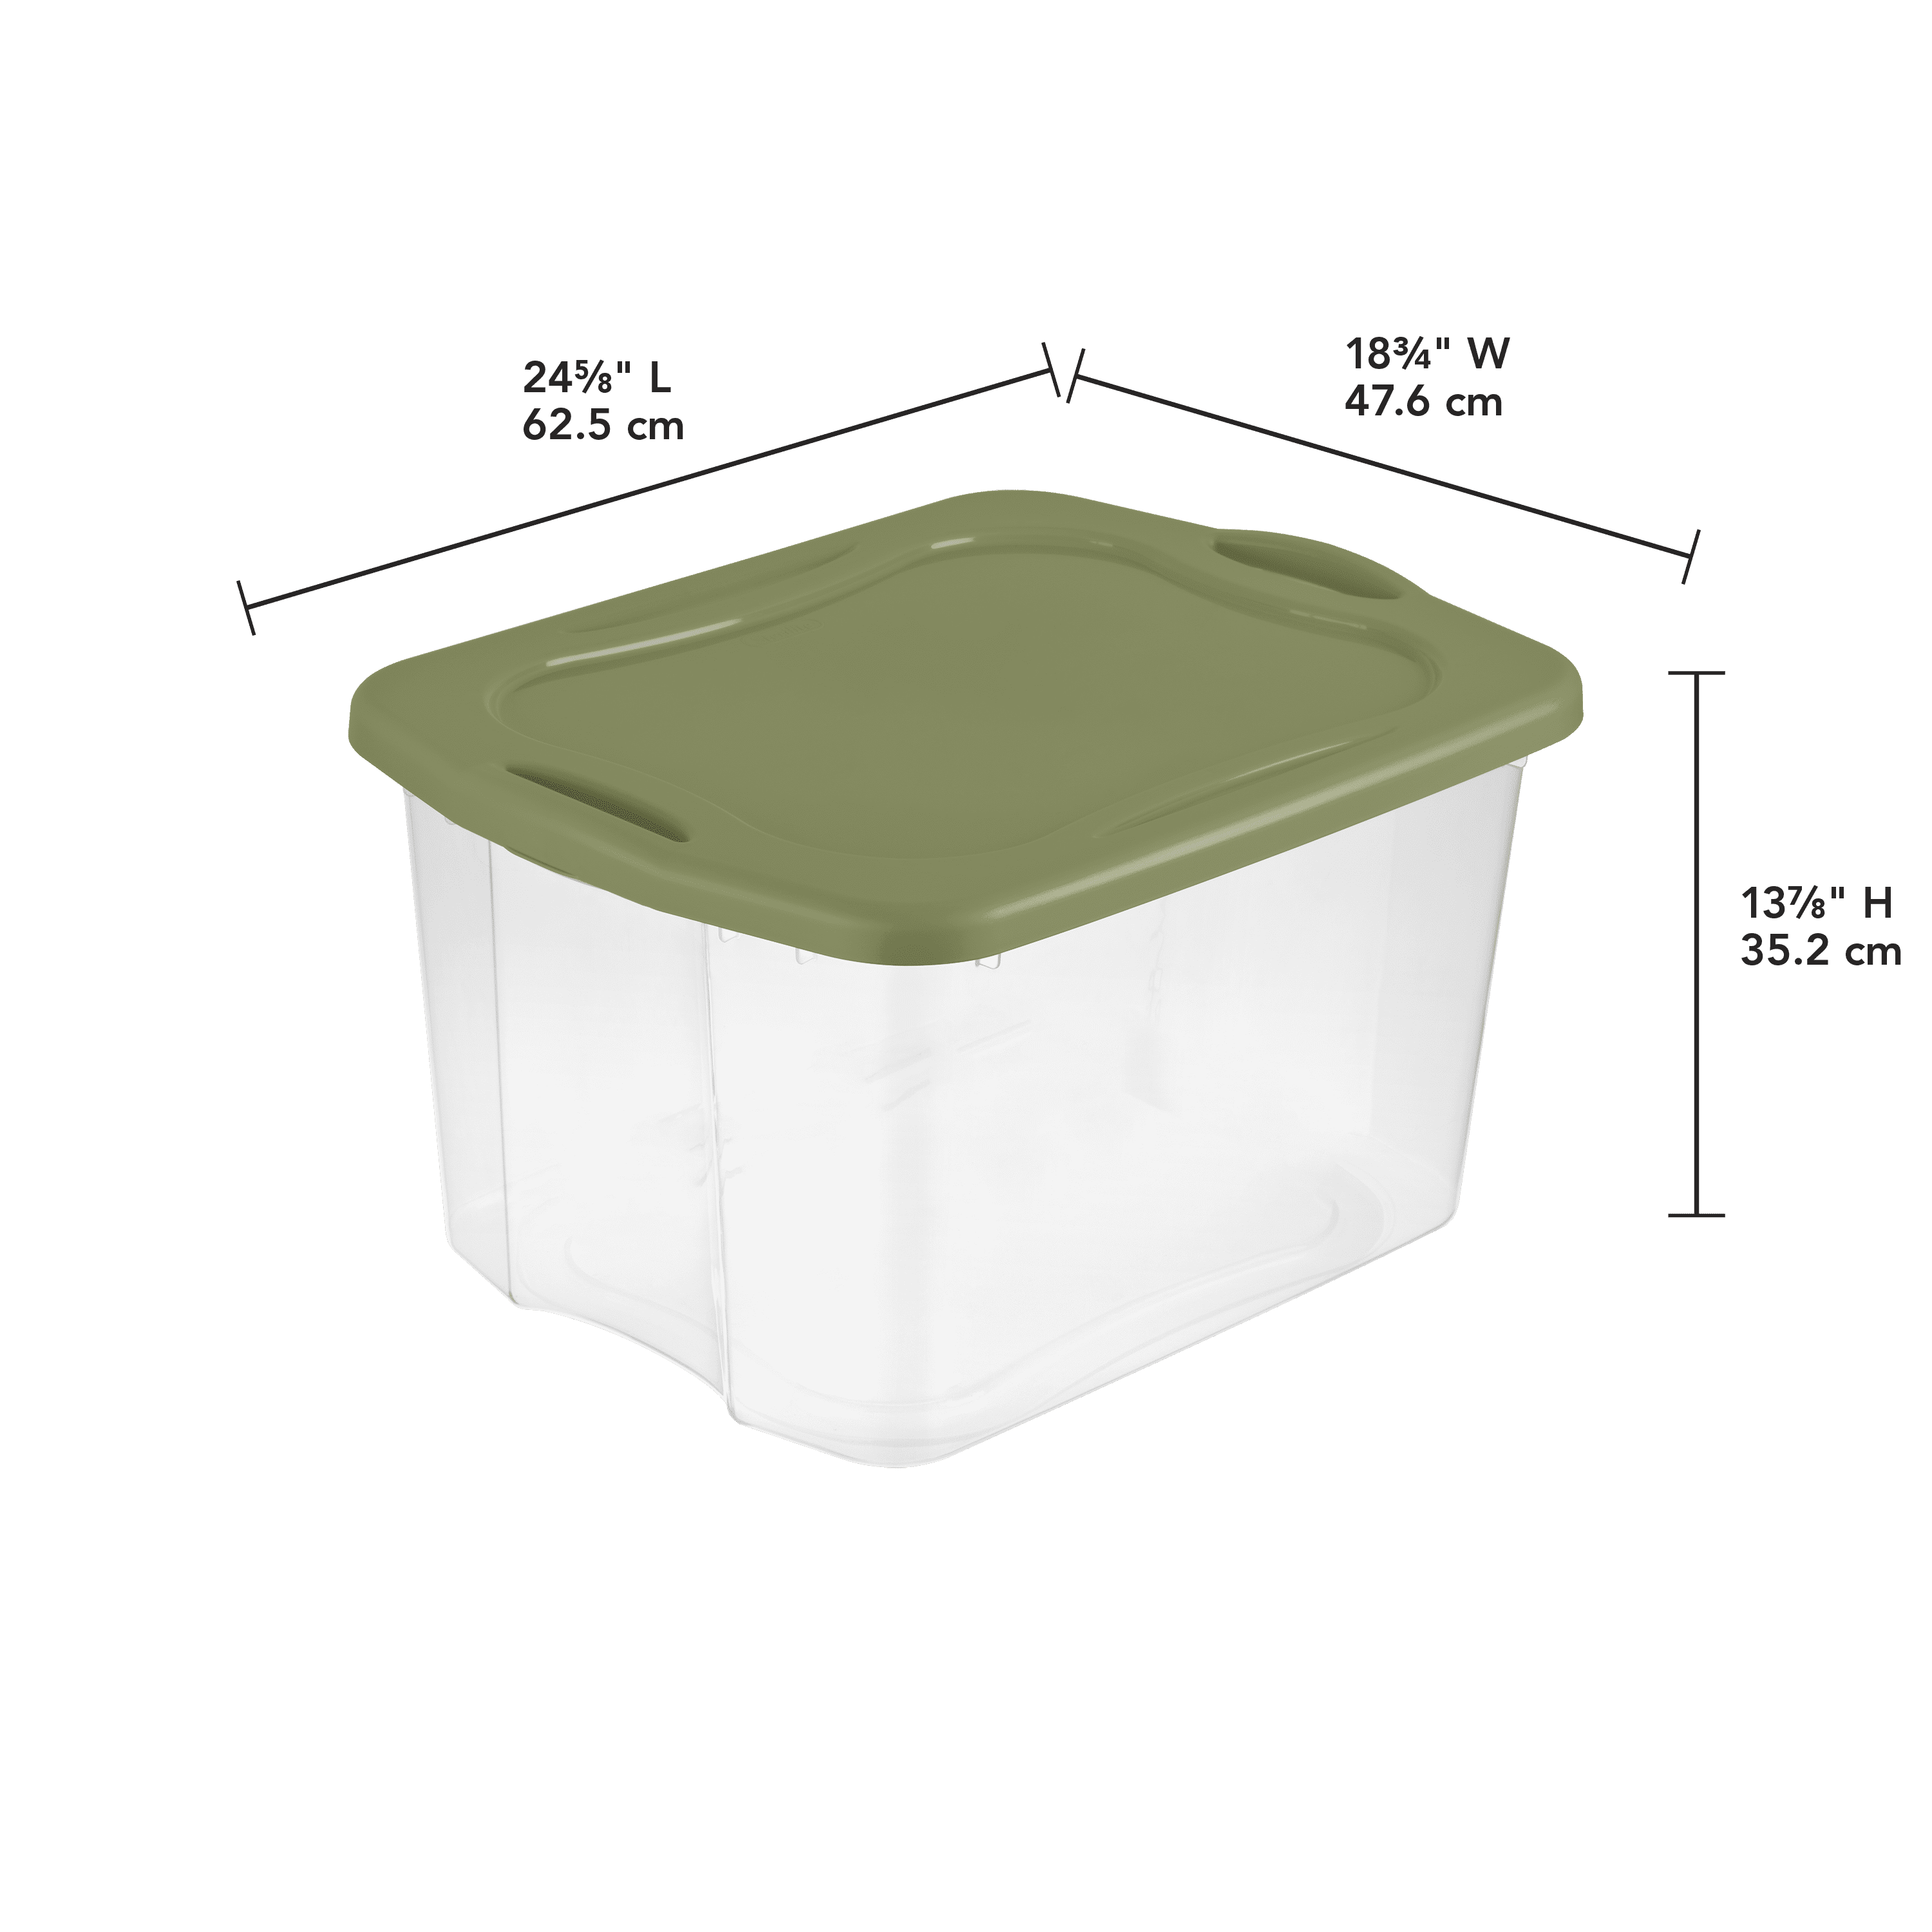 70 qt. Plastic Storage Bin with Lid in Clear (3-pack)